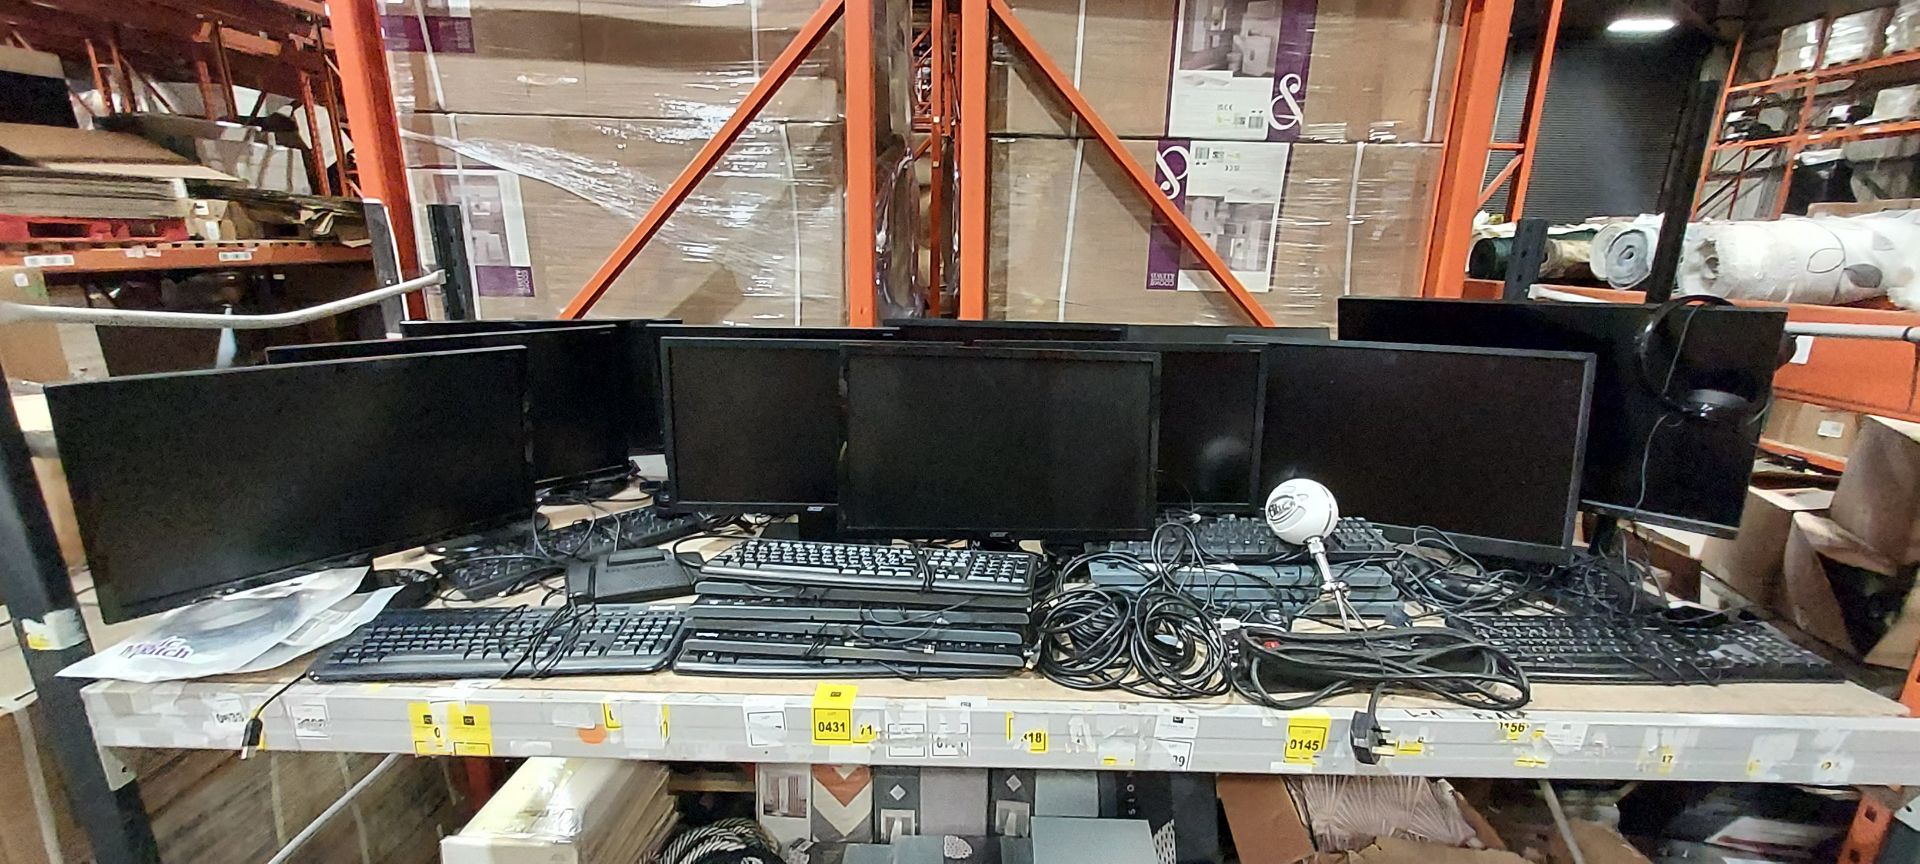 30+ PIECE MIXED IT LOT CONTAINING 10 ACER COMPUTER MONITOS 2018, 1 LARGE ACER MONITOR, VARIOUS